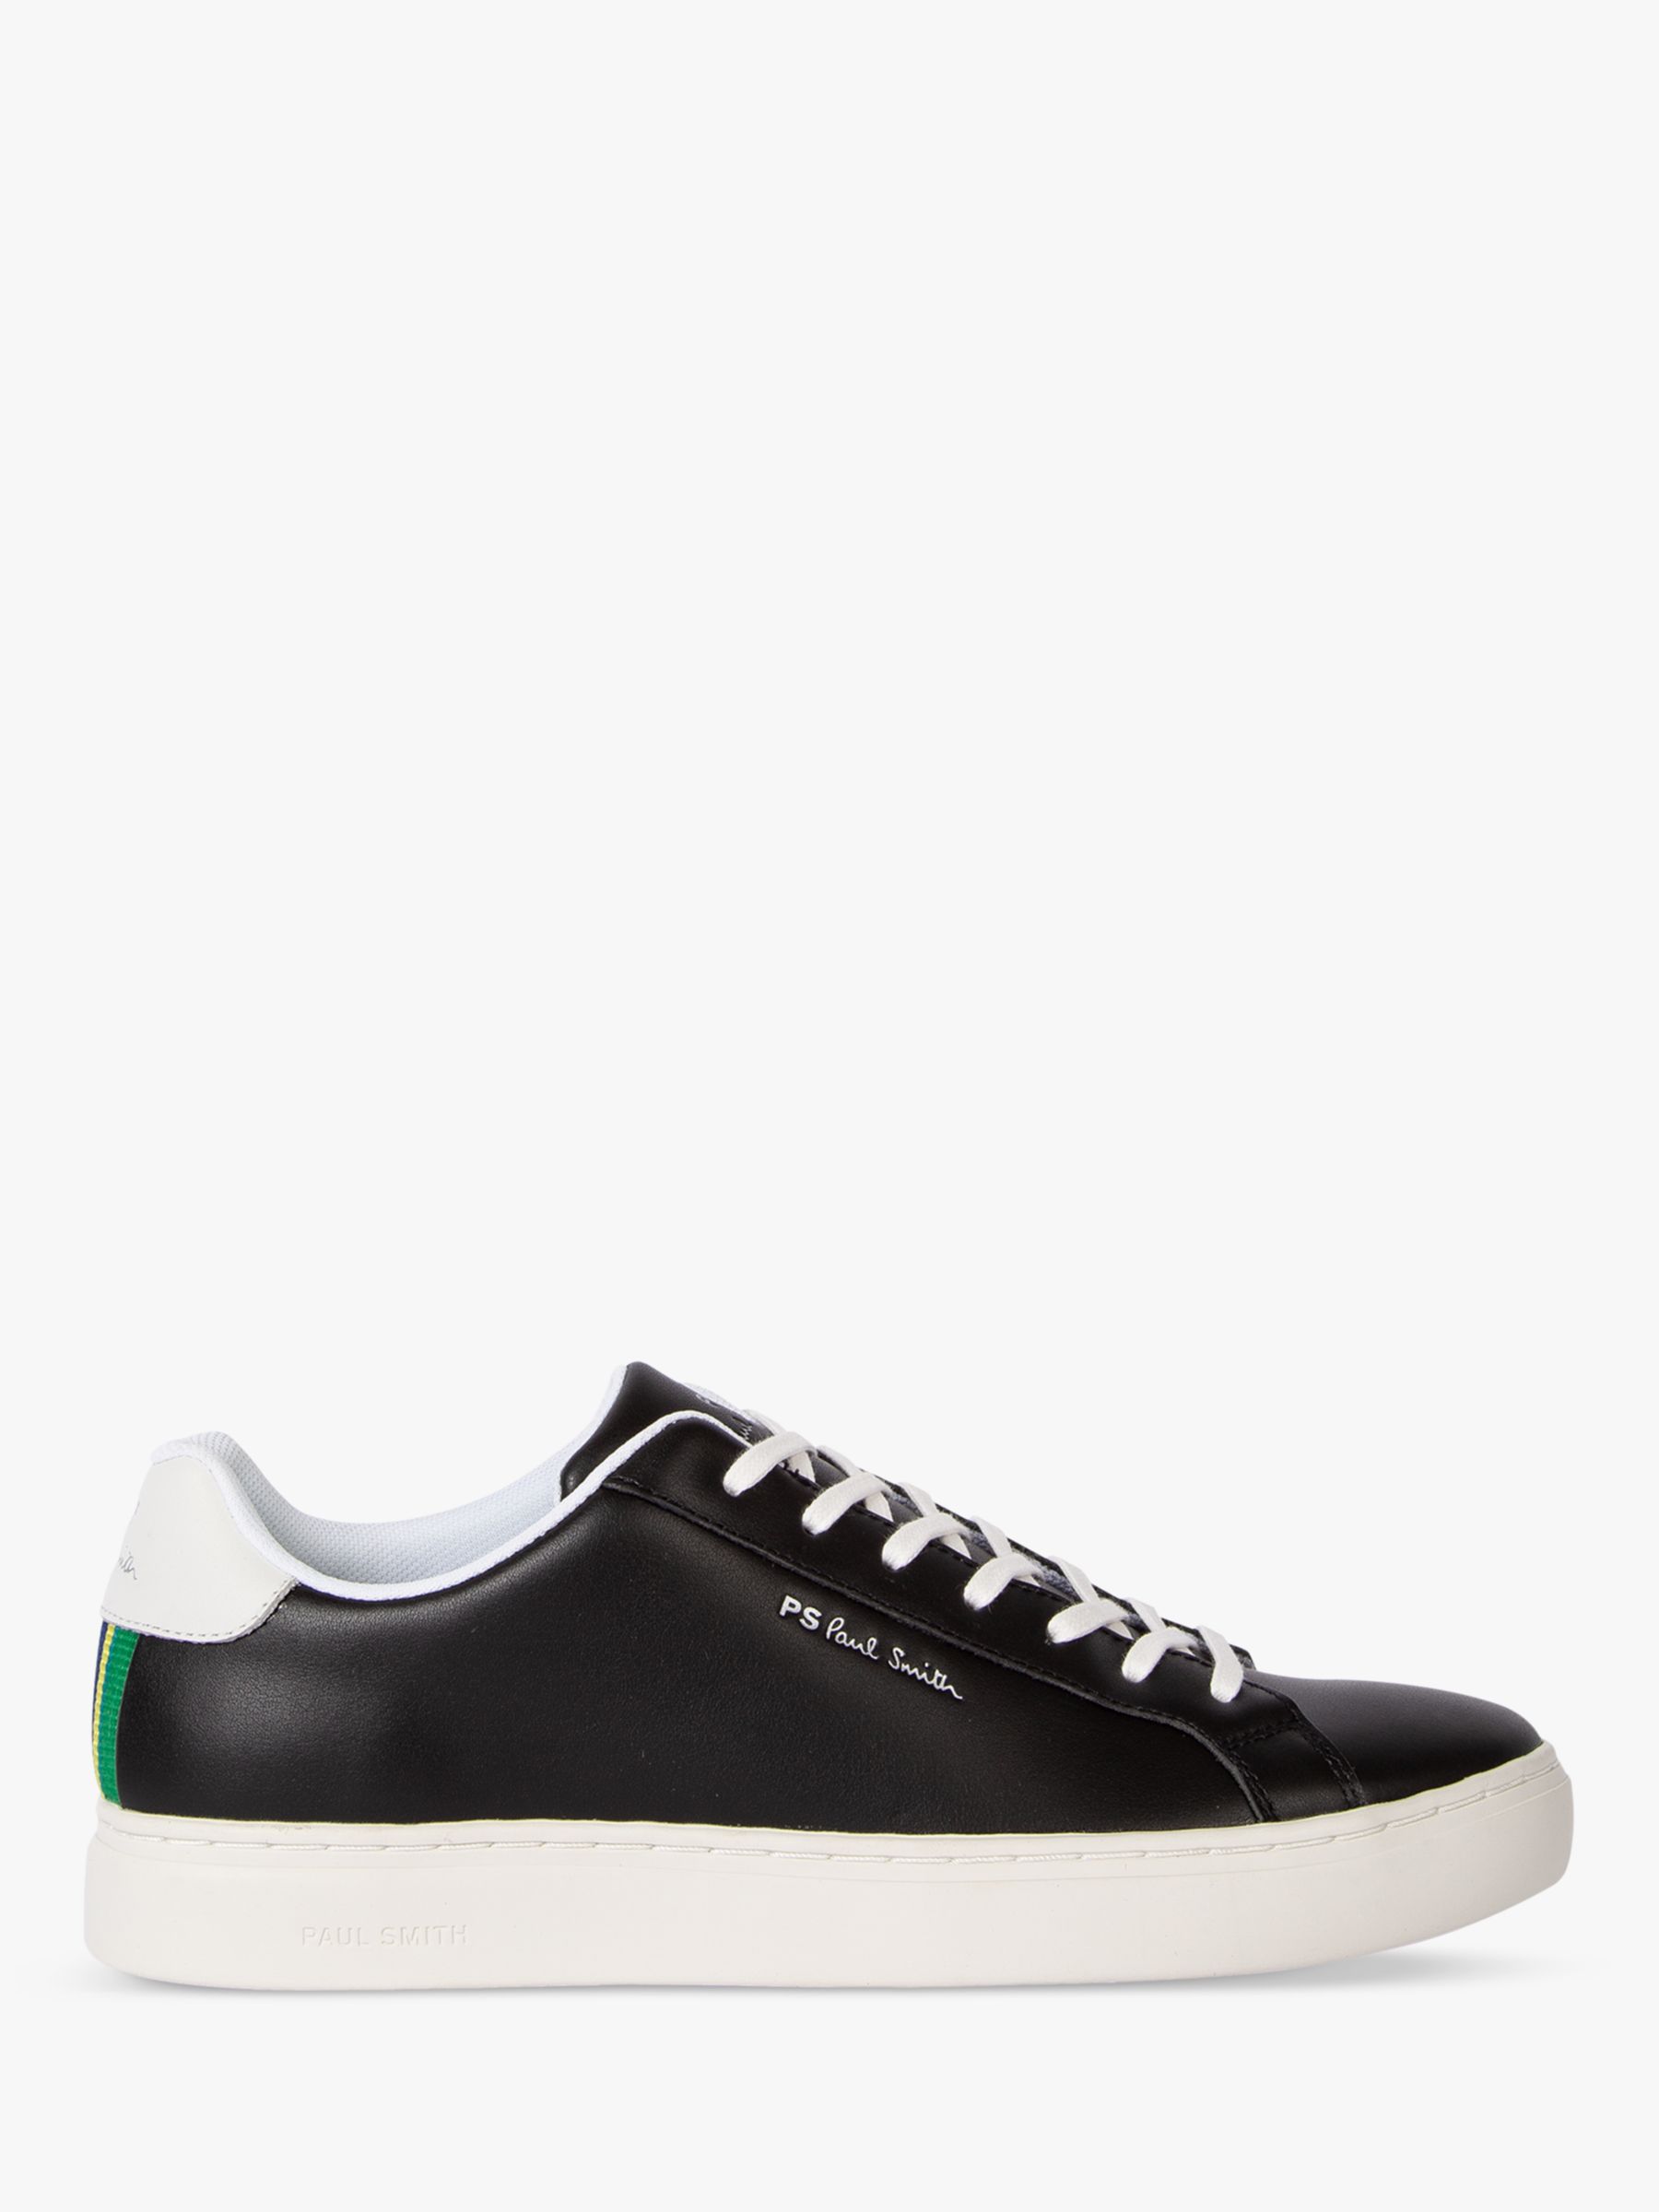 Paul Smith Rex Tape Detail Low Top Leather Trainers, Black, 7